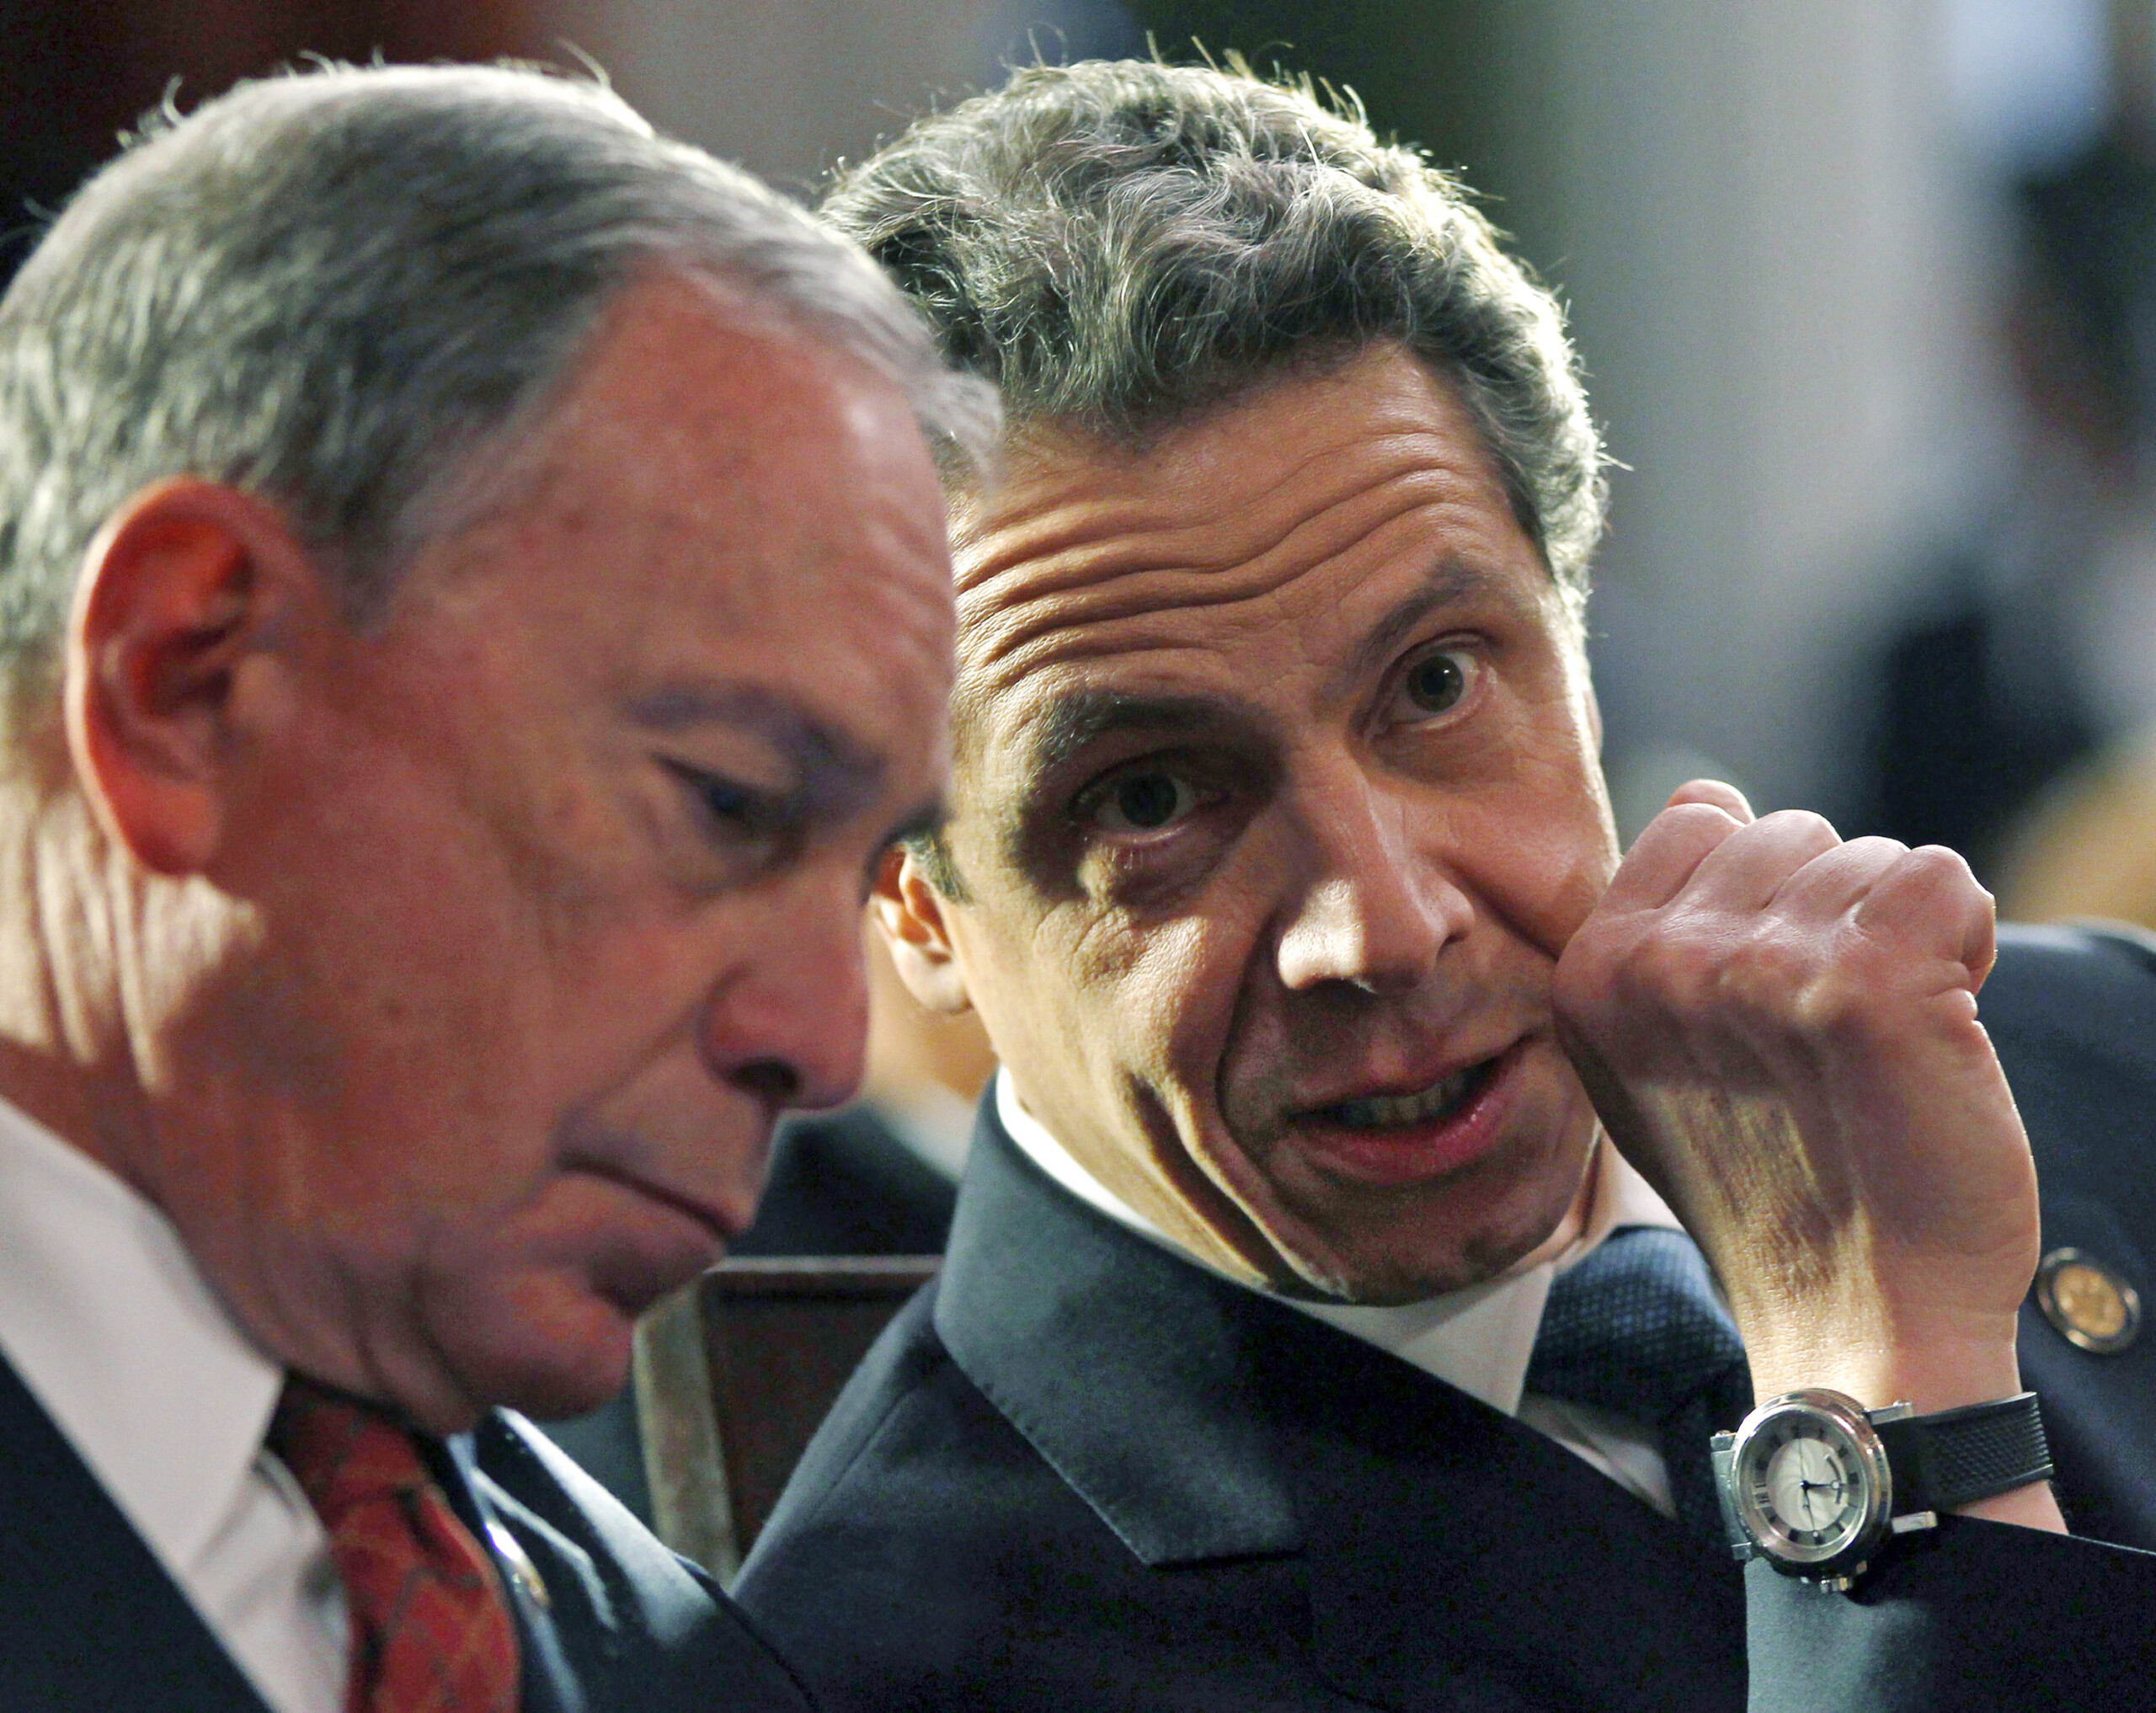 As Gov. Andrew Cuomo Looks To Michael Bloomberg For Contact